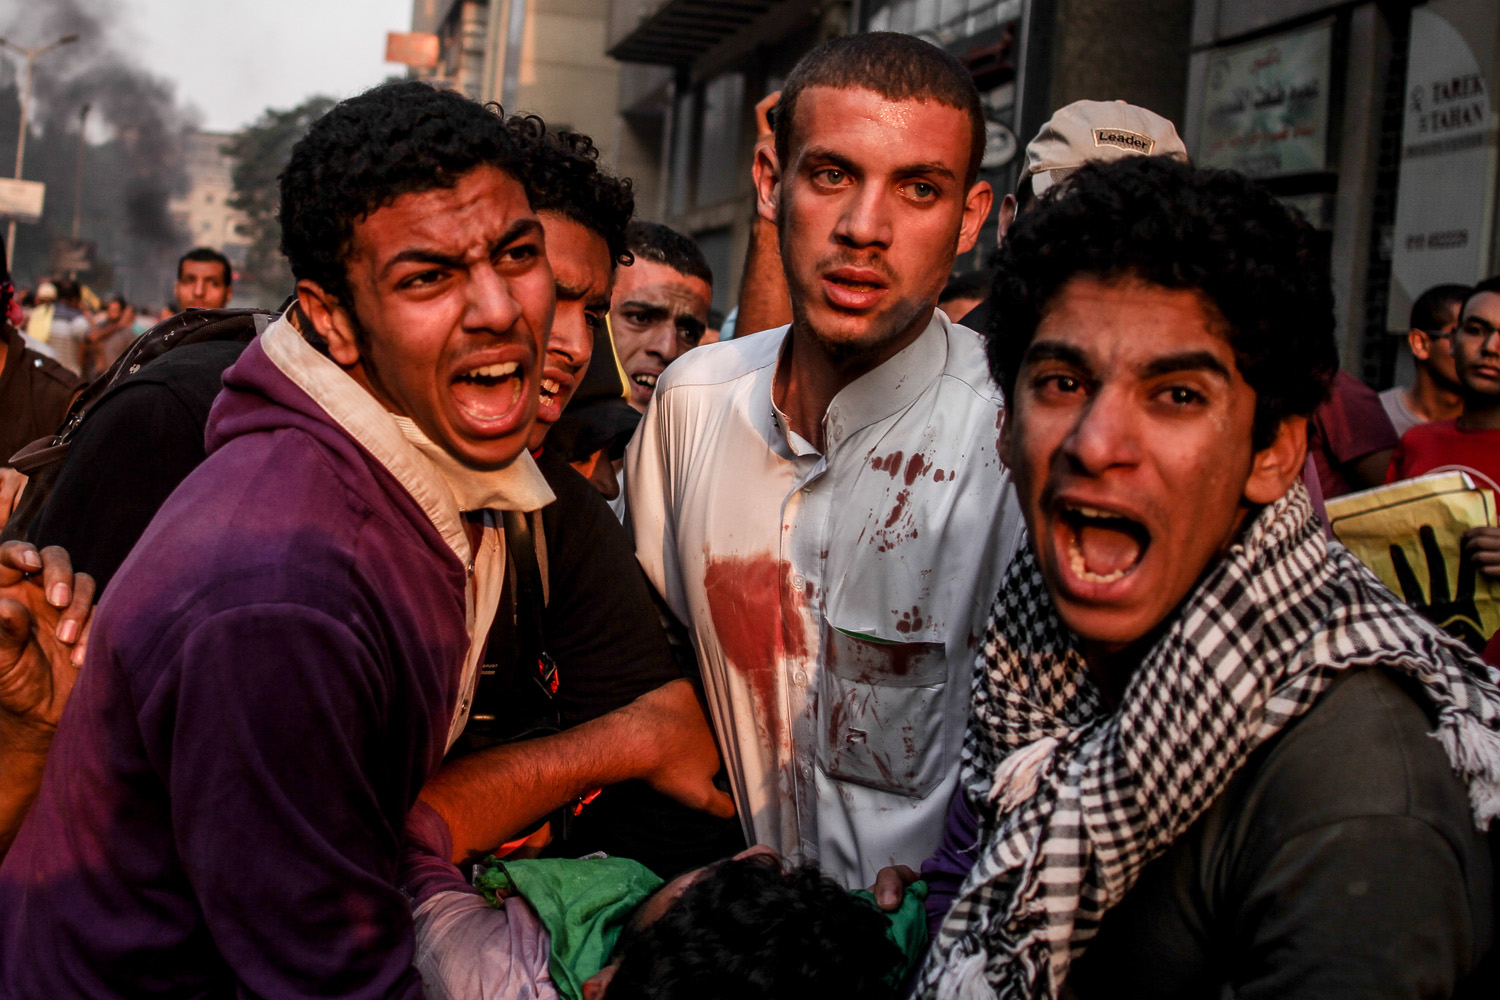 An injured Egyptian supporter of ousted President Morsi is assisted during clashes on the day the country celebrates the 40th anniversary of the 1973 Arab-Israeli war, in the Dokki area of Giza, near Cairo, Egypt, 06 October 2013.